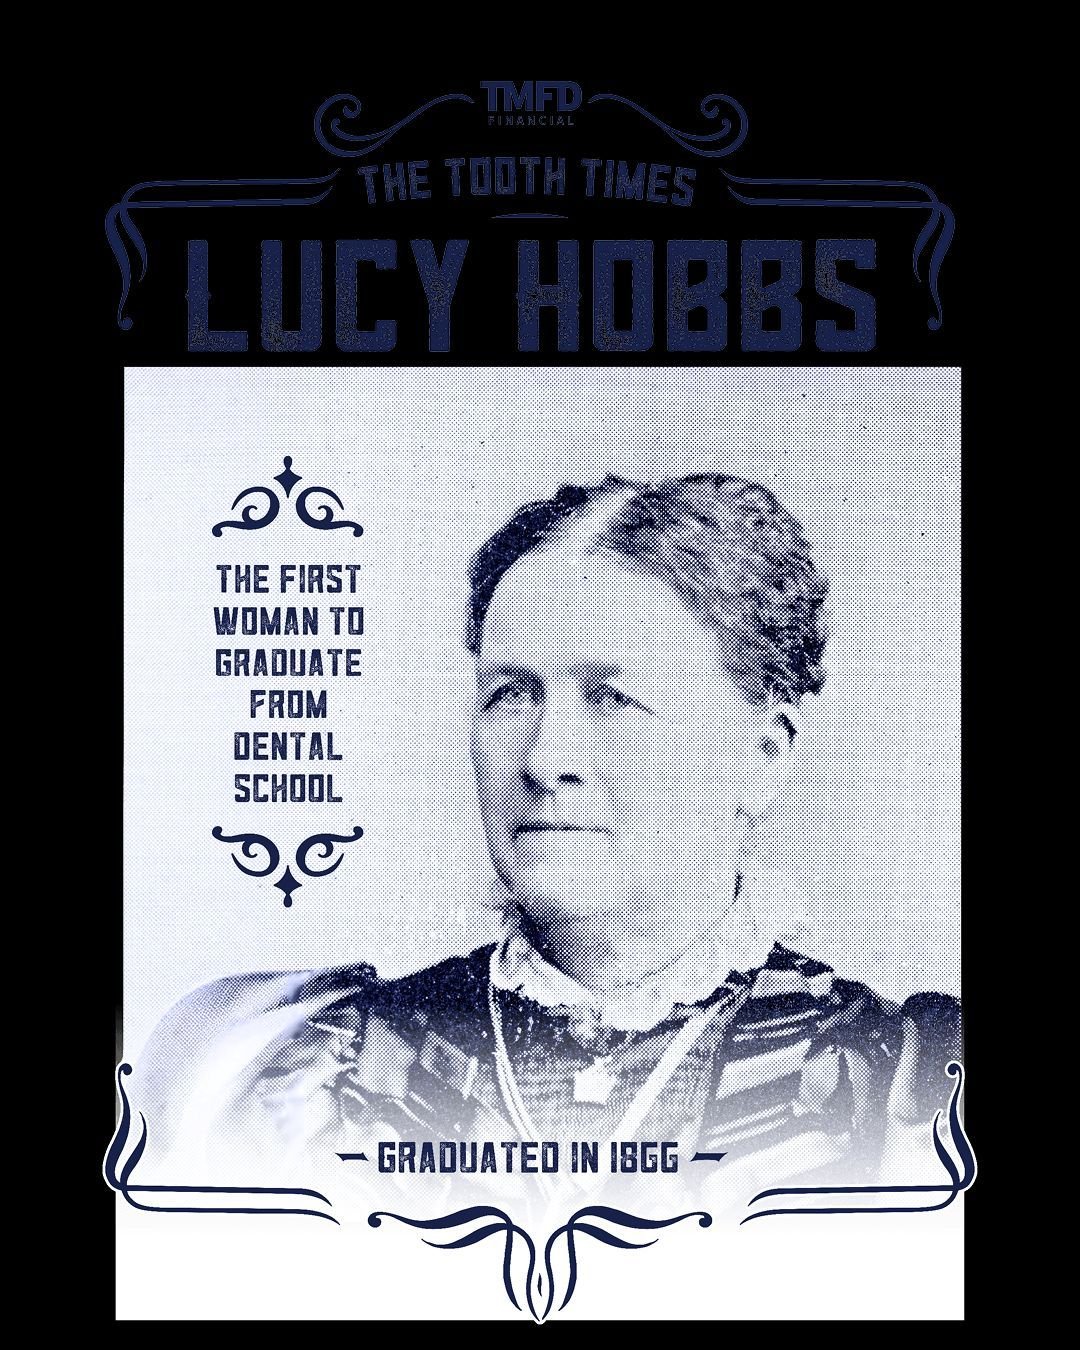 The year was 1866, and a woman by the name of Lucy Hobbs Taylor achieved something no other woman had before. Against all odds, she became the first American woman to earn a degree in dentistry from the Ohio College of Dental Surgery. 

Lucy's journe